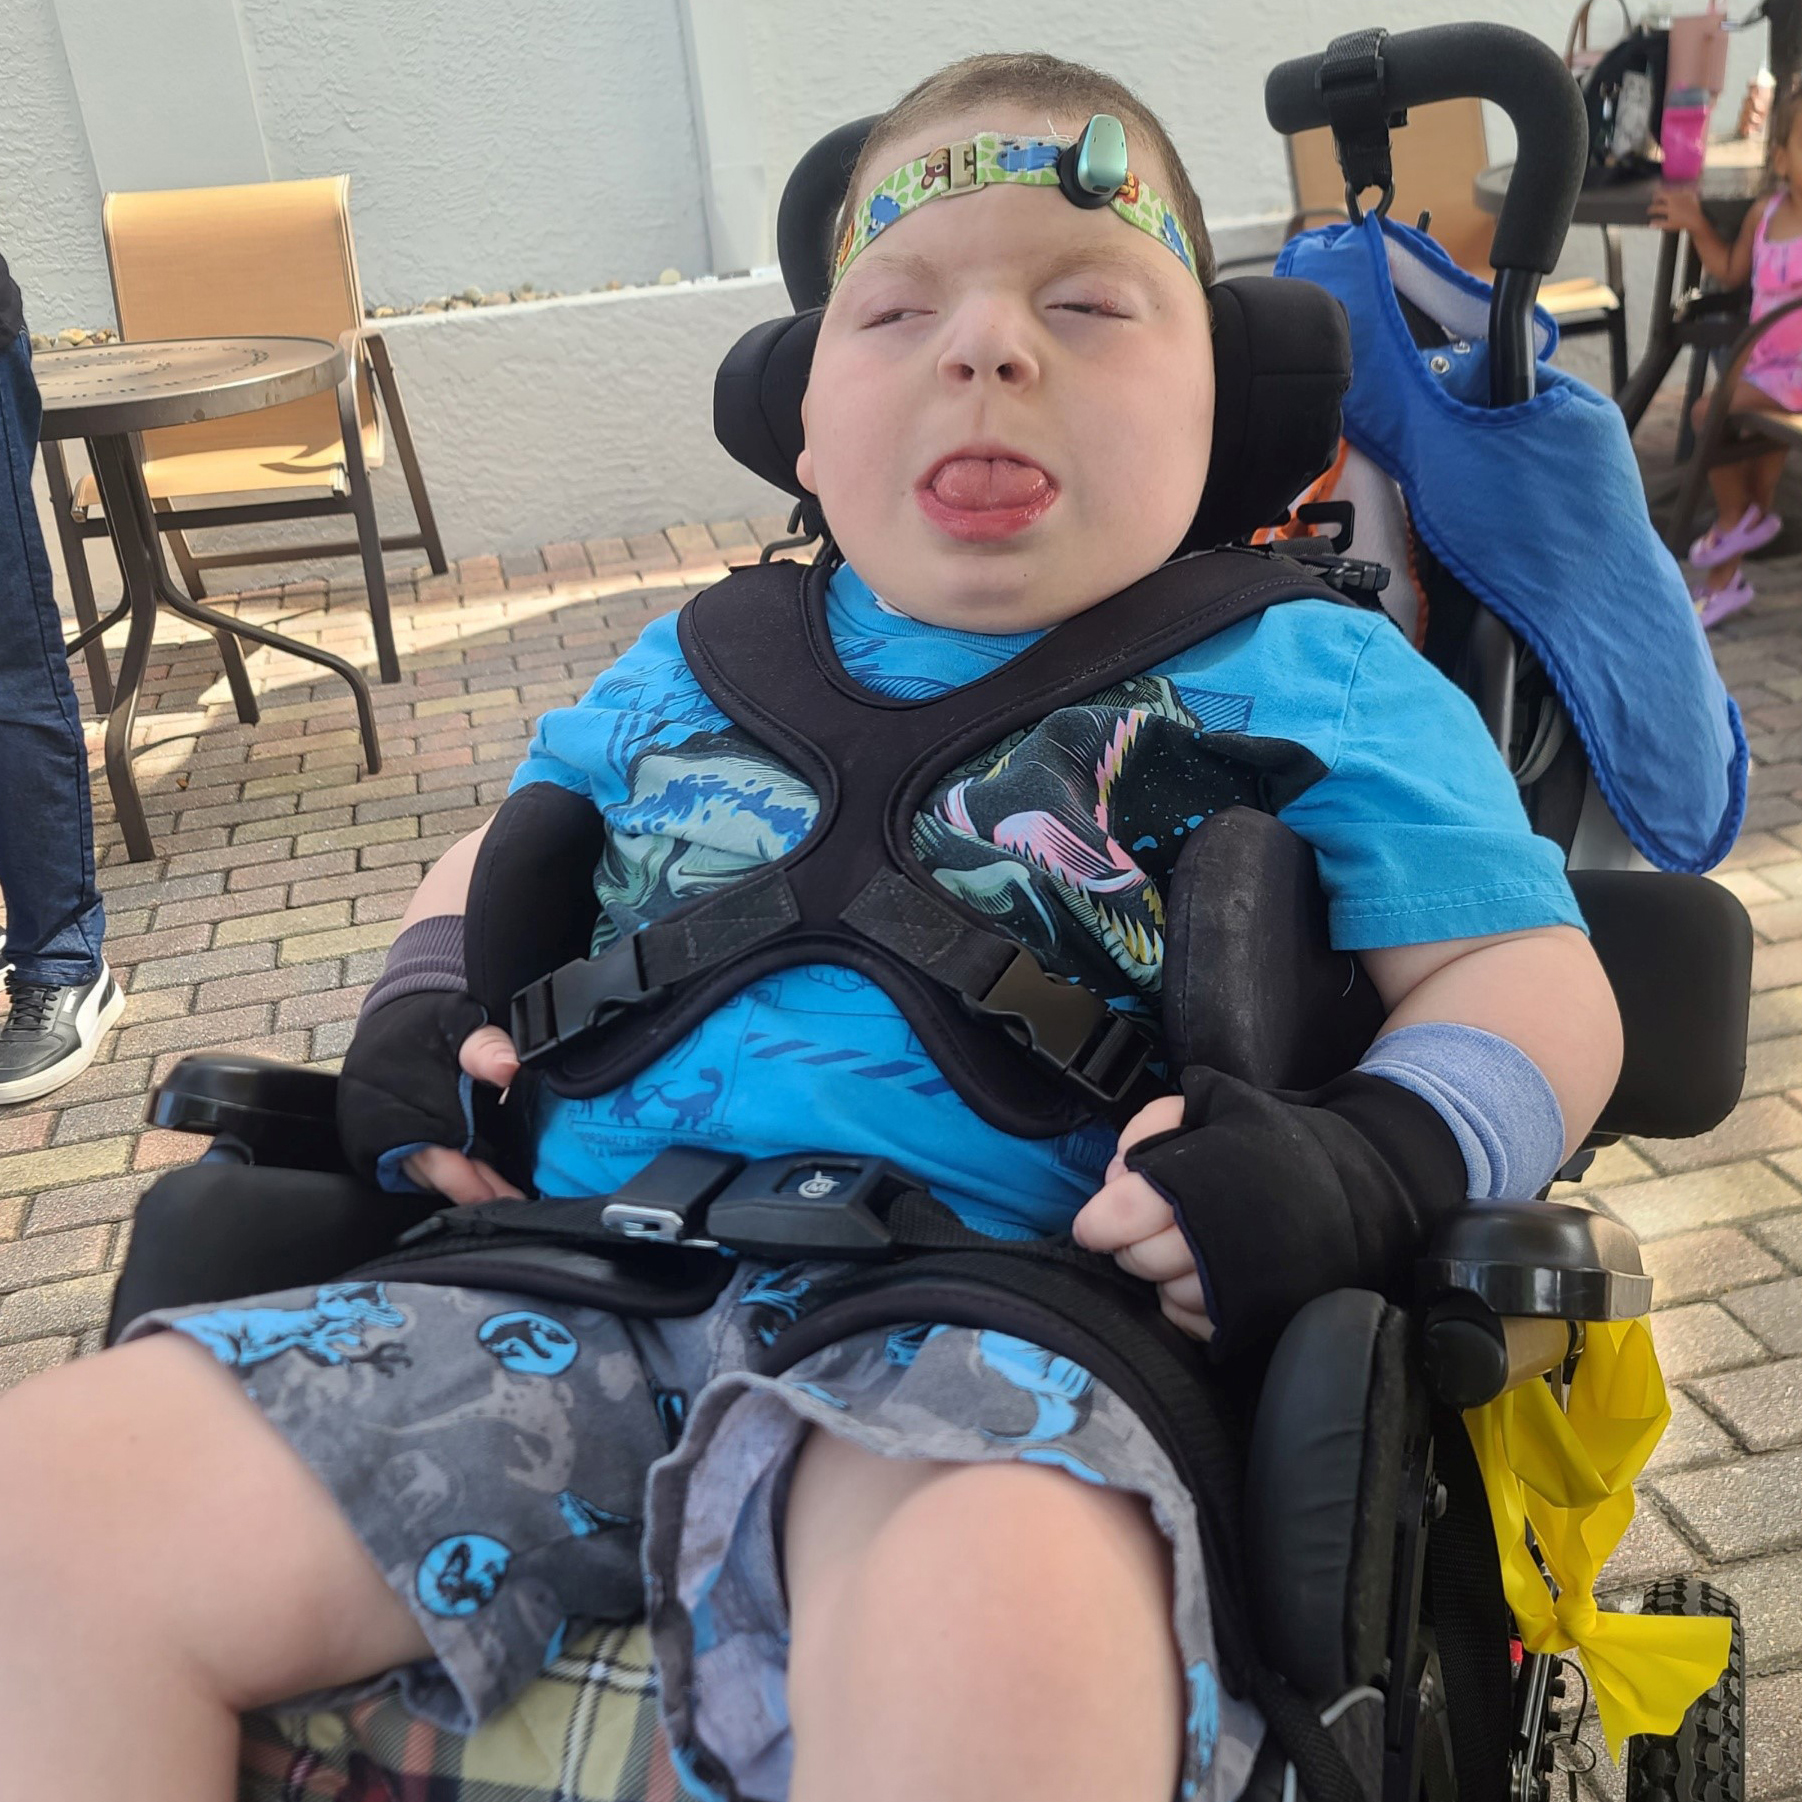 A photo of a young boy in a wheelchair.